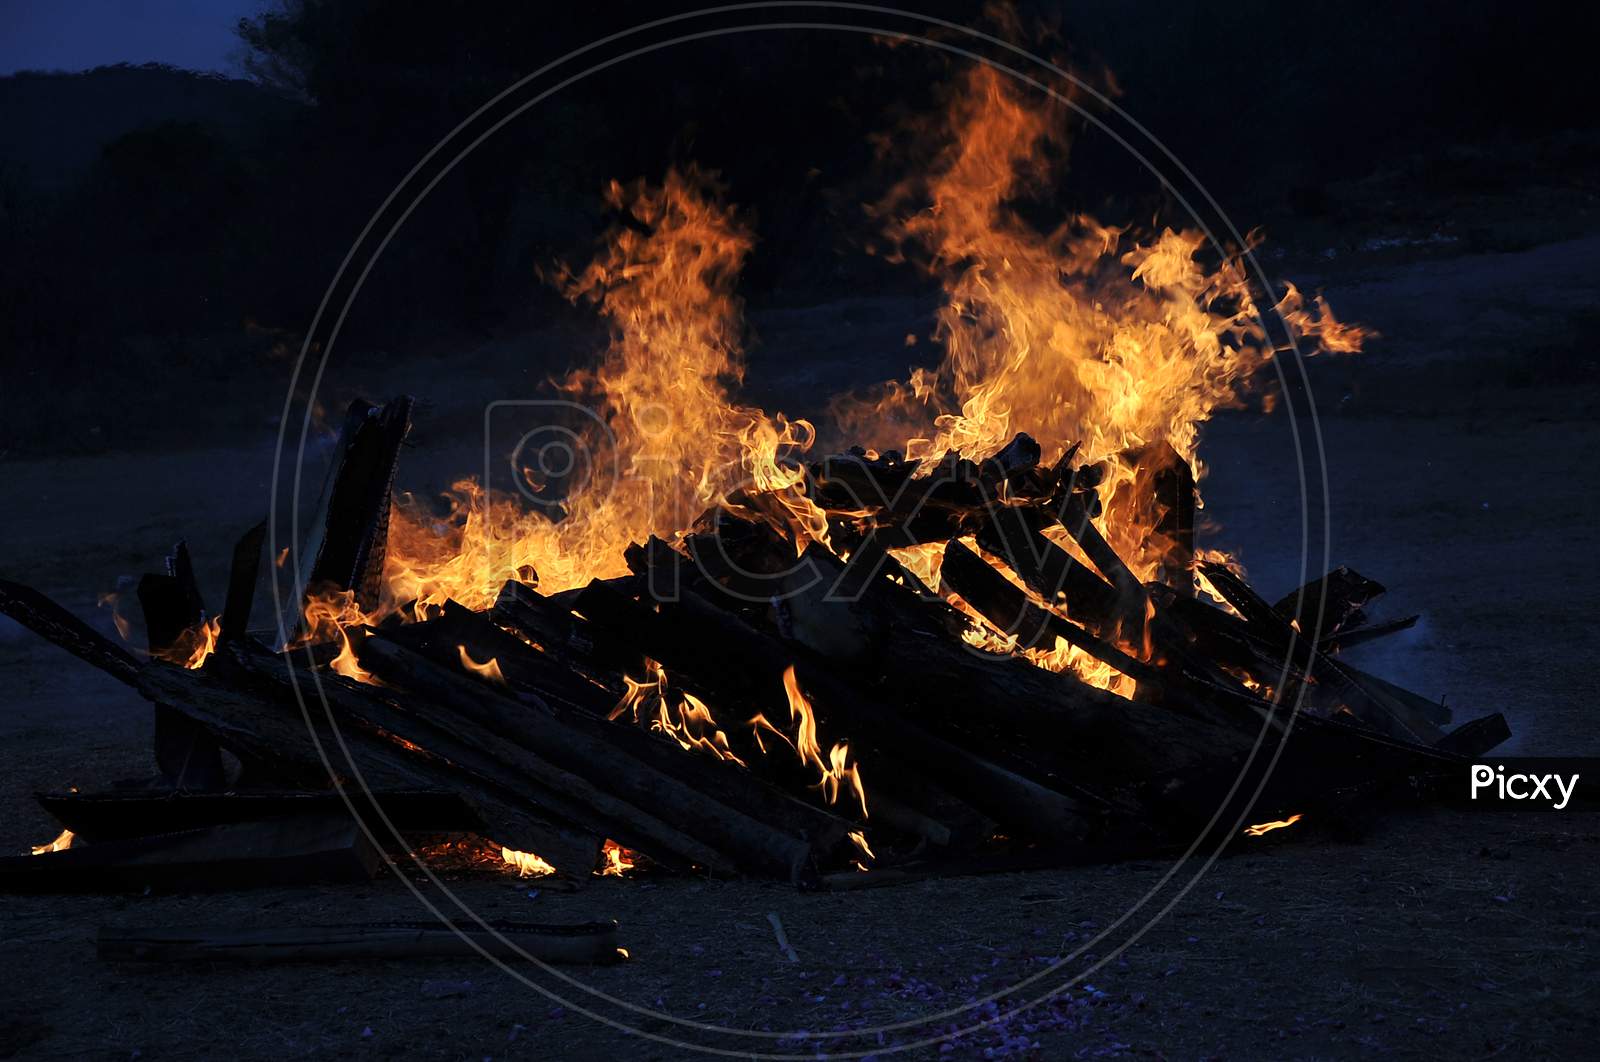 Image of Cremation Fire In a Crematorium-LL927058-Picxy